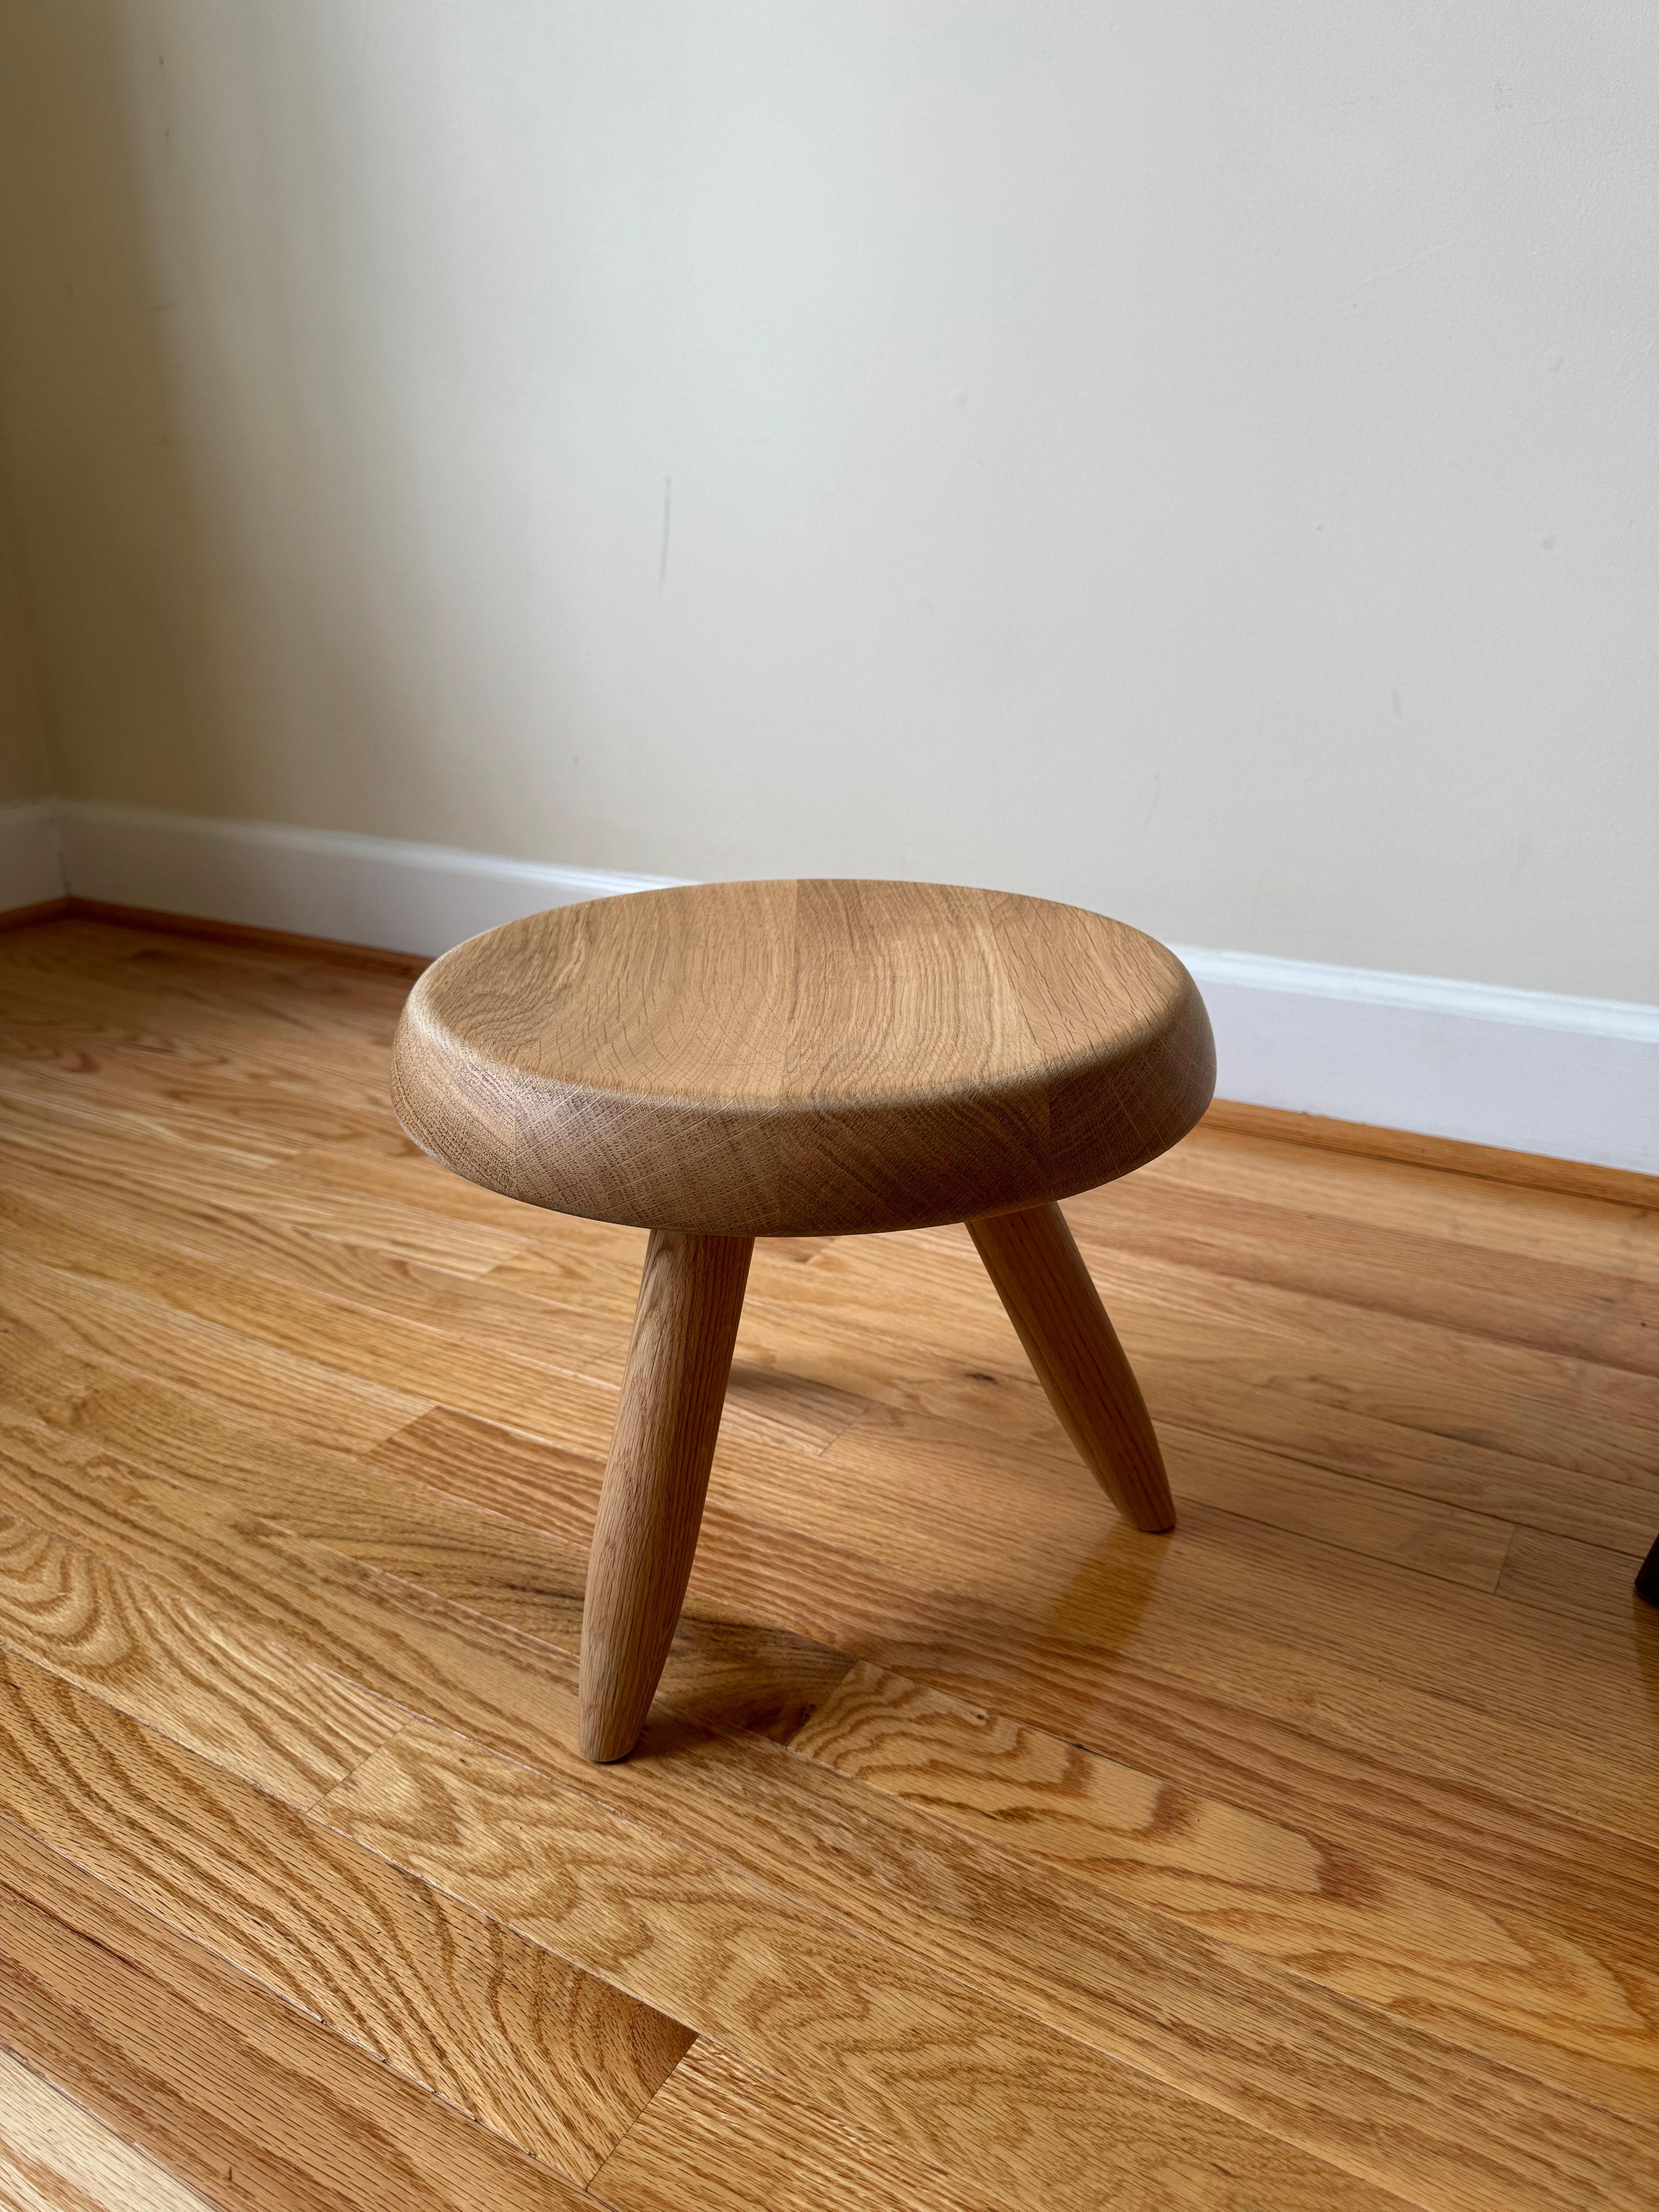 Mid-Century Modern Tabouret Berger (Berger Stool) by Charlotte Perriand for Cassina For Sale